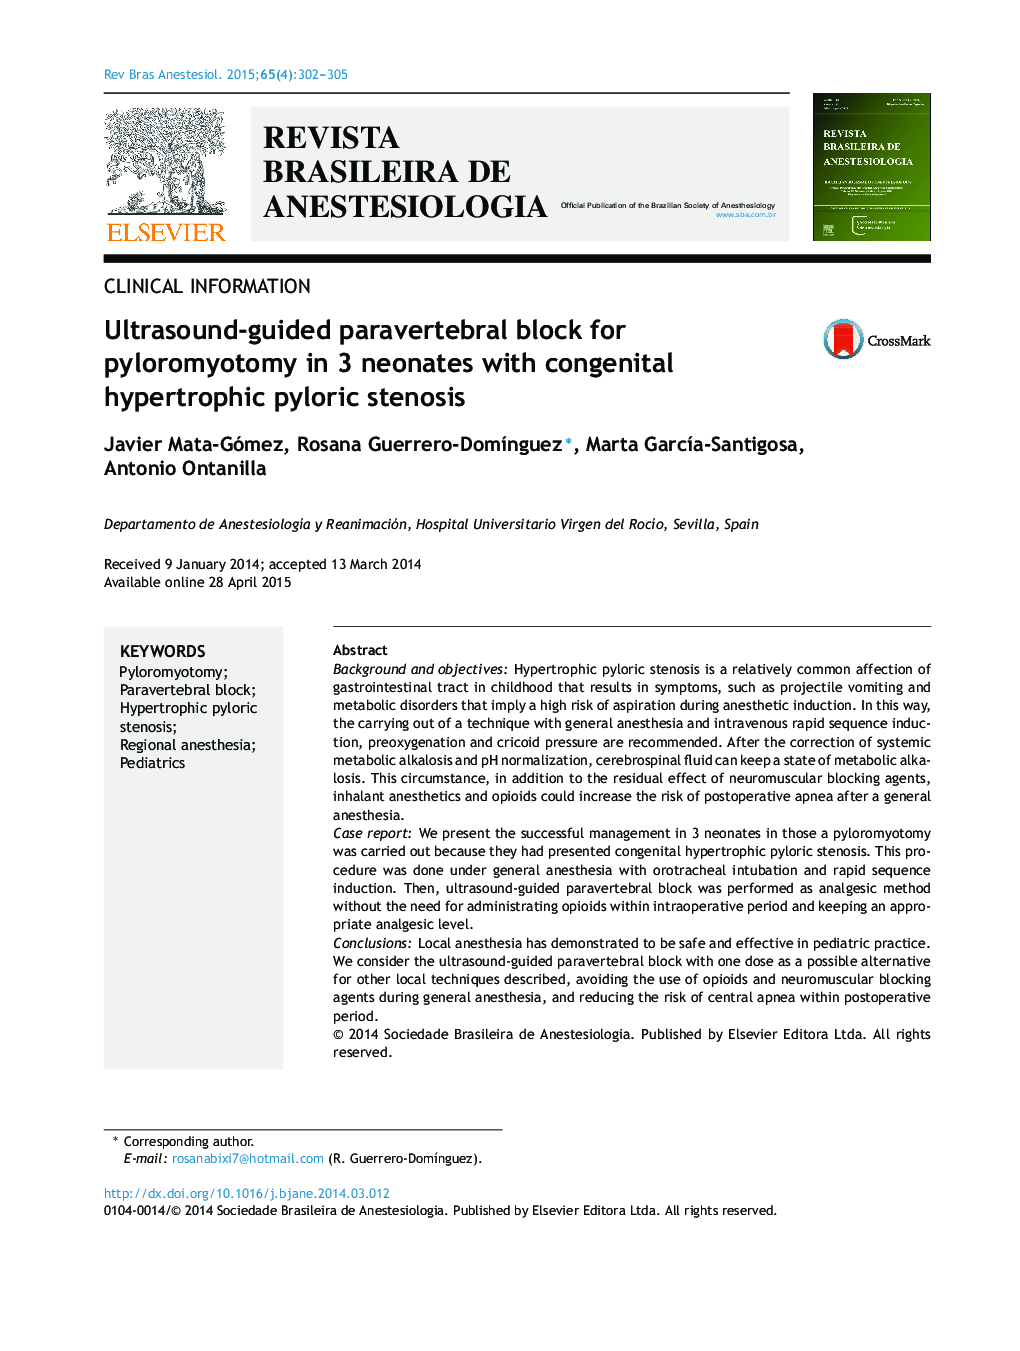 Ultrasound-guided paravertebral block for pyloromyotomy in 3 neonates with congenital hypertrophic pyloric stenosis